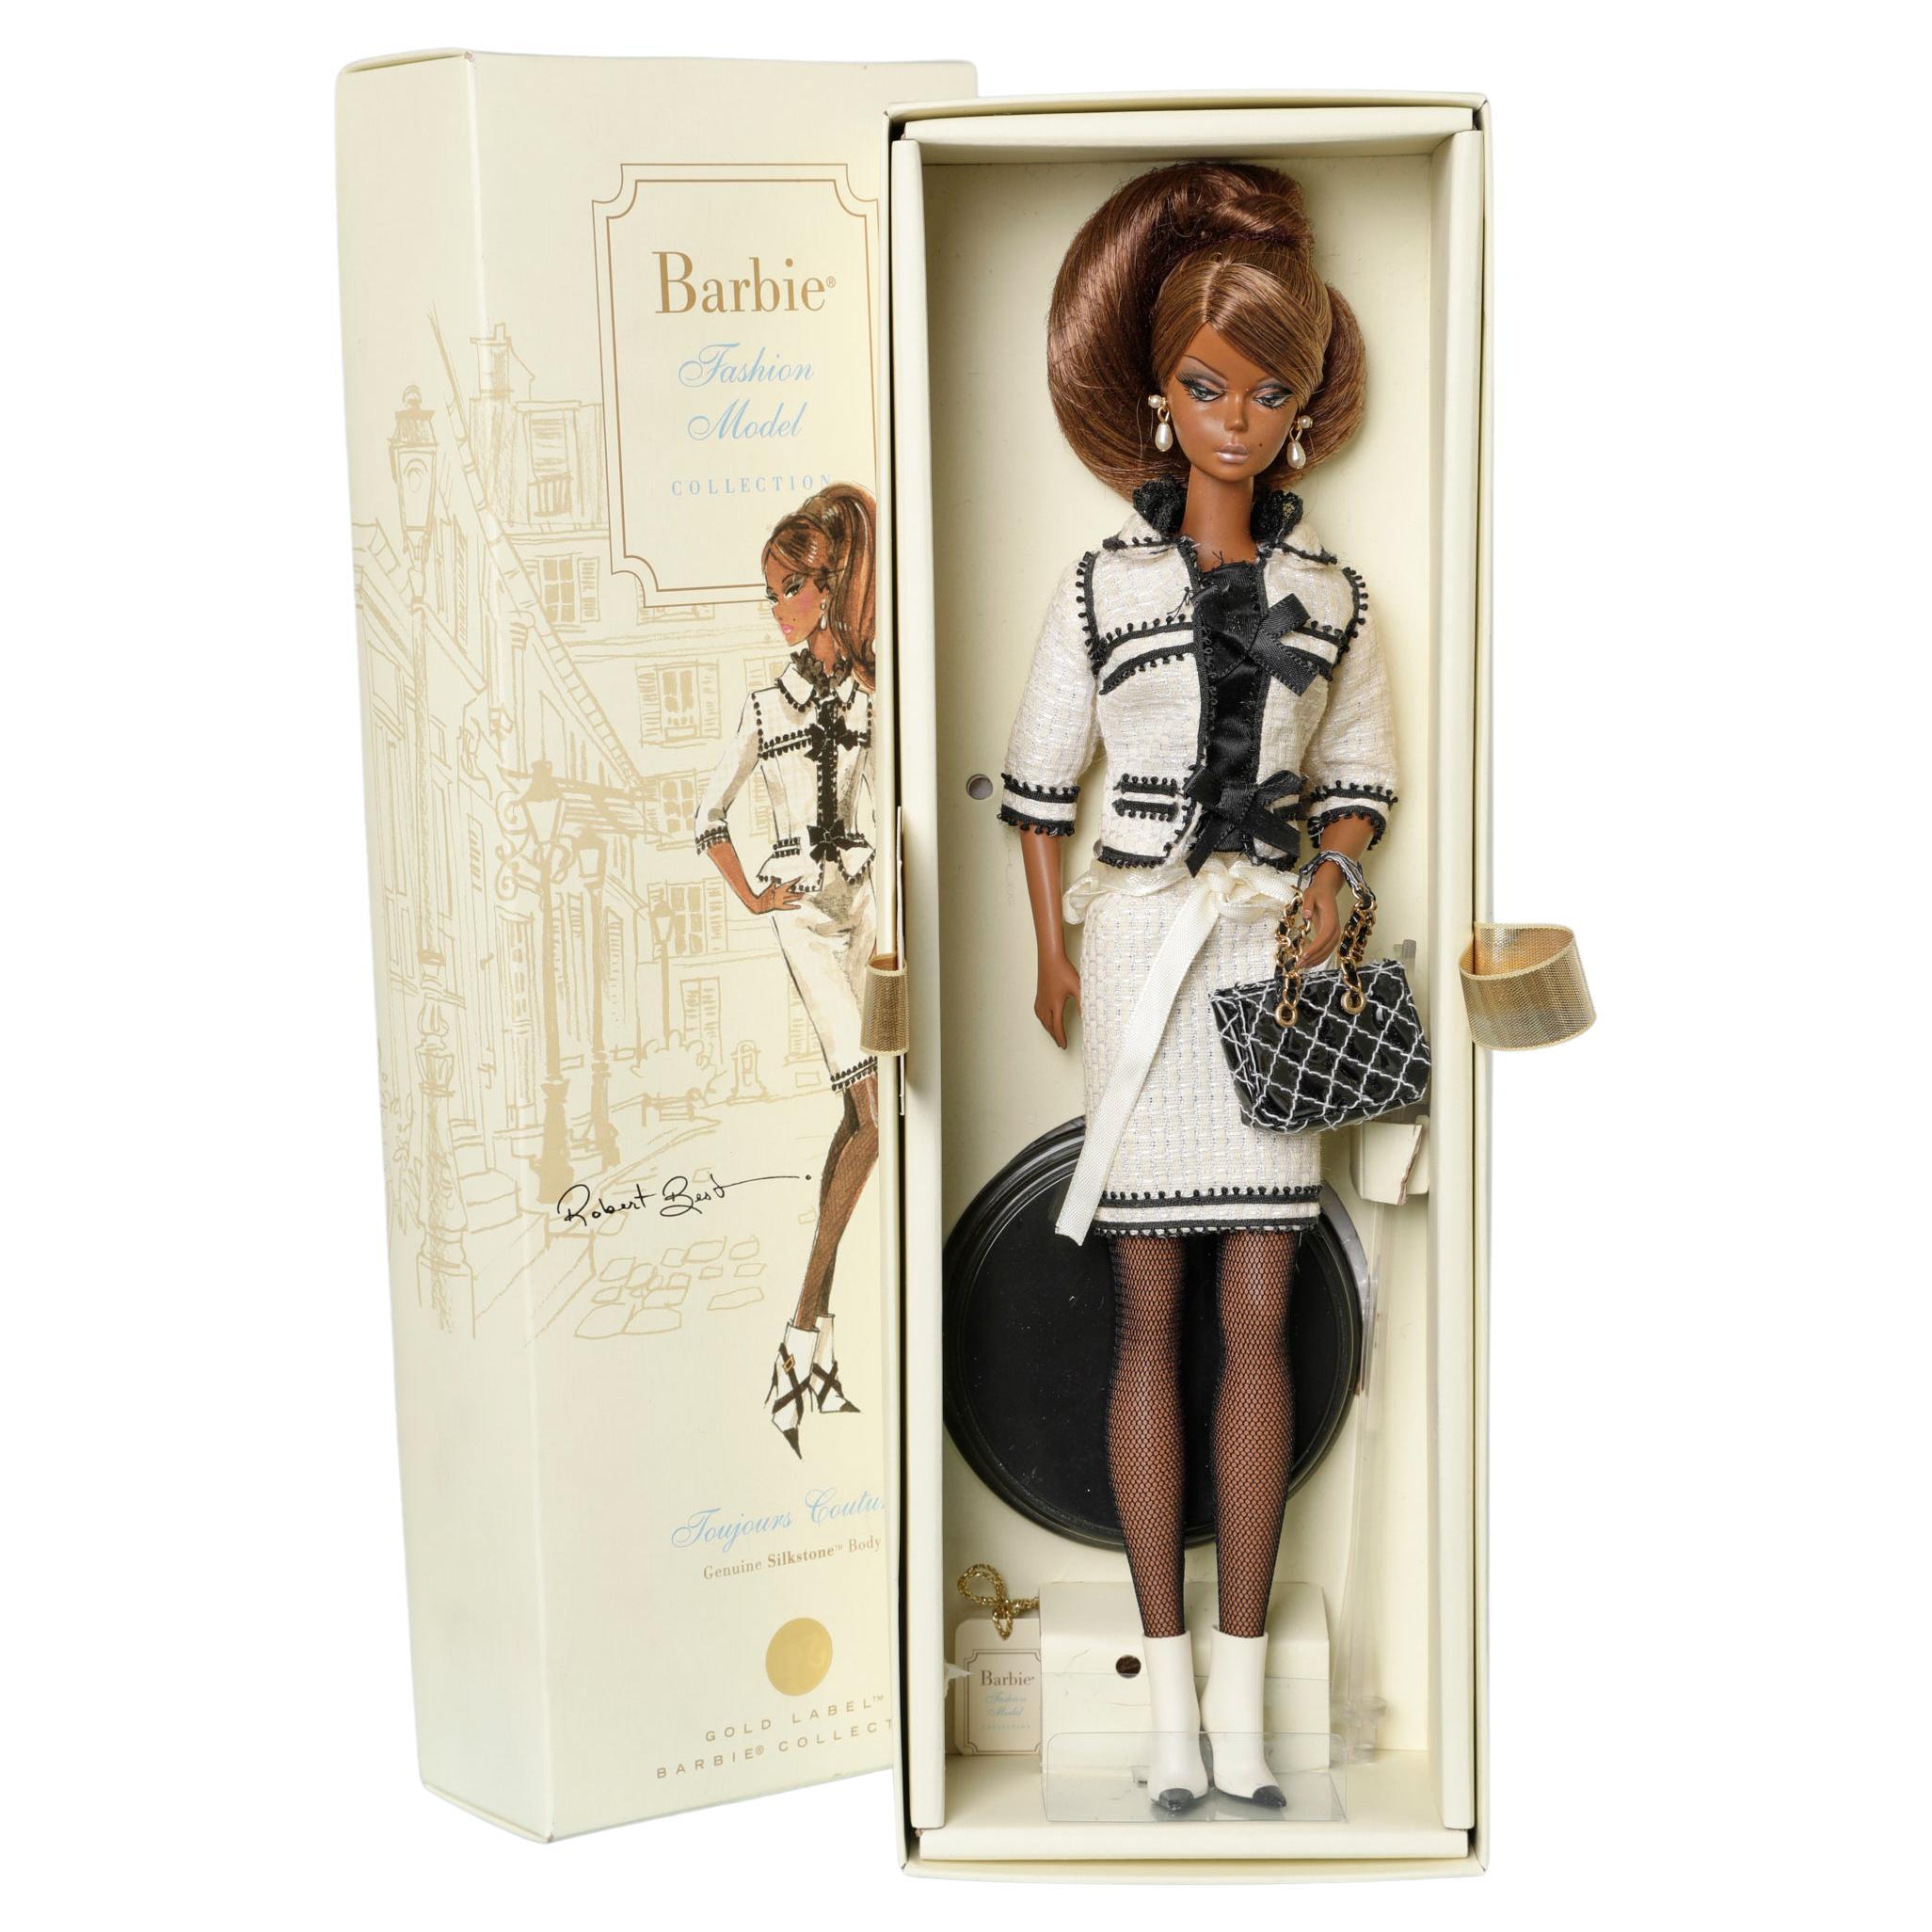 Toujours Couture " Barbie Fashion Model Gold Label Barbie Collector ( 2007)  For Sale at 1stDibs | chanel barbie collection, barbie fashion  illustration, barbie fashionista 2007